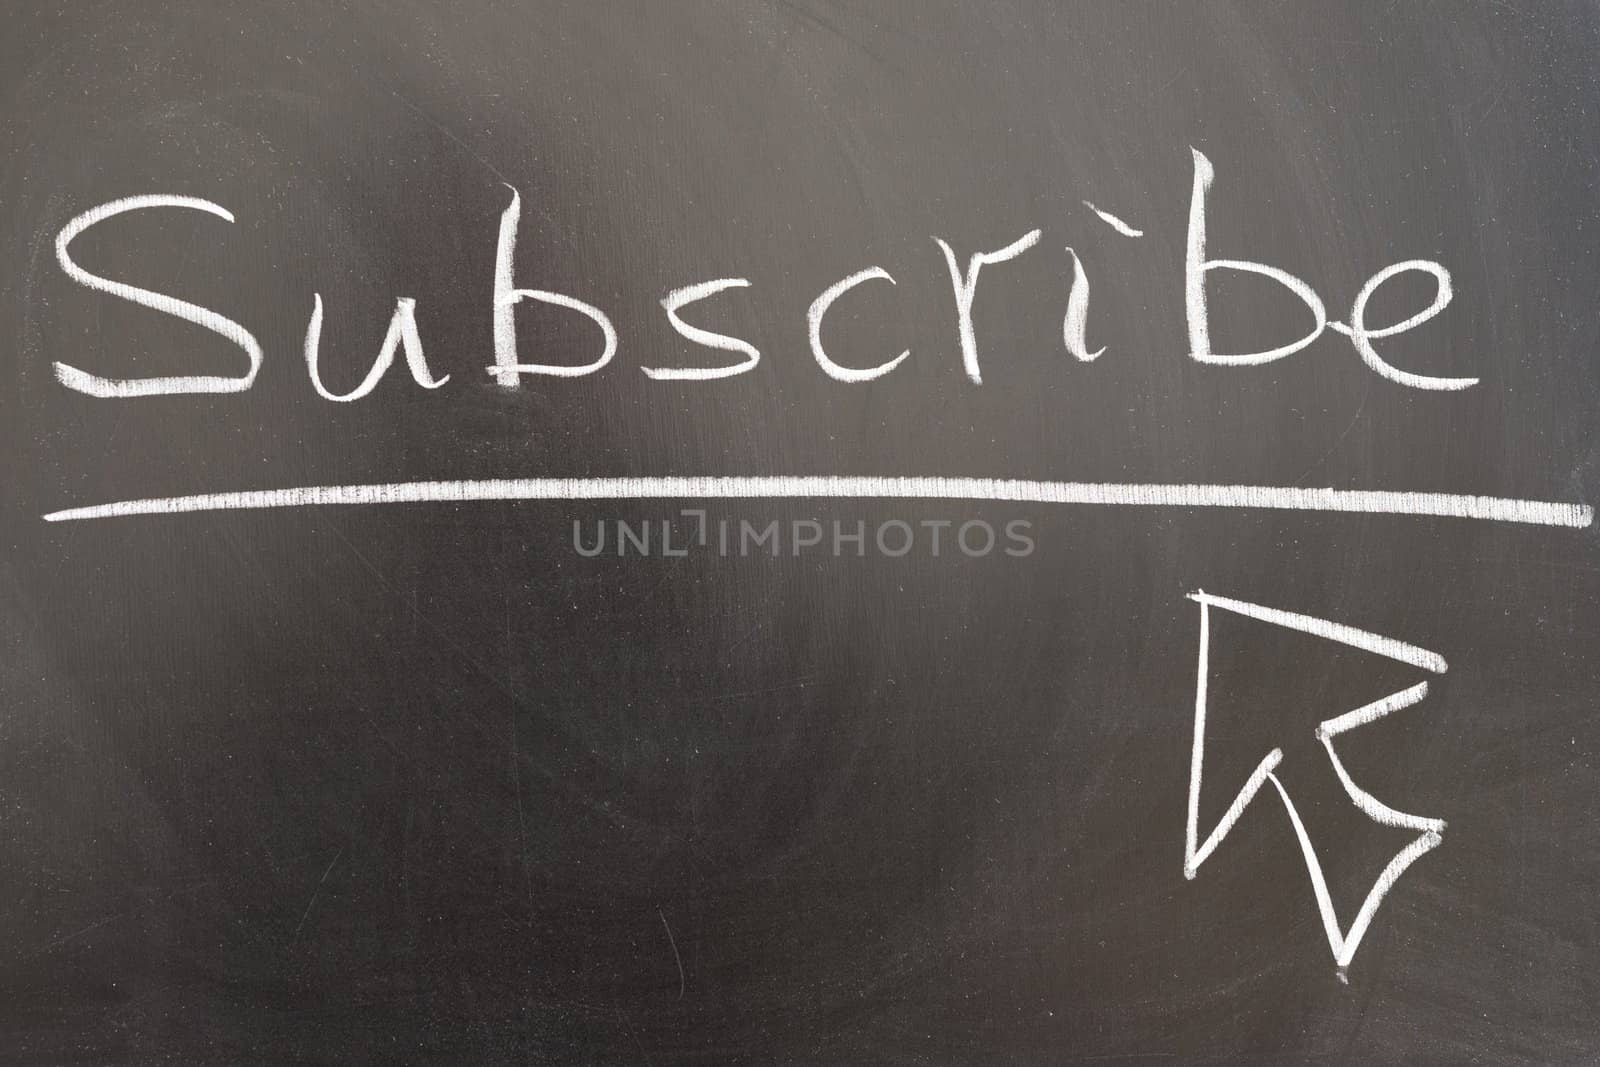 Subscribe and mouse pointer drawn on chalkboard